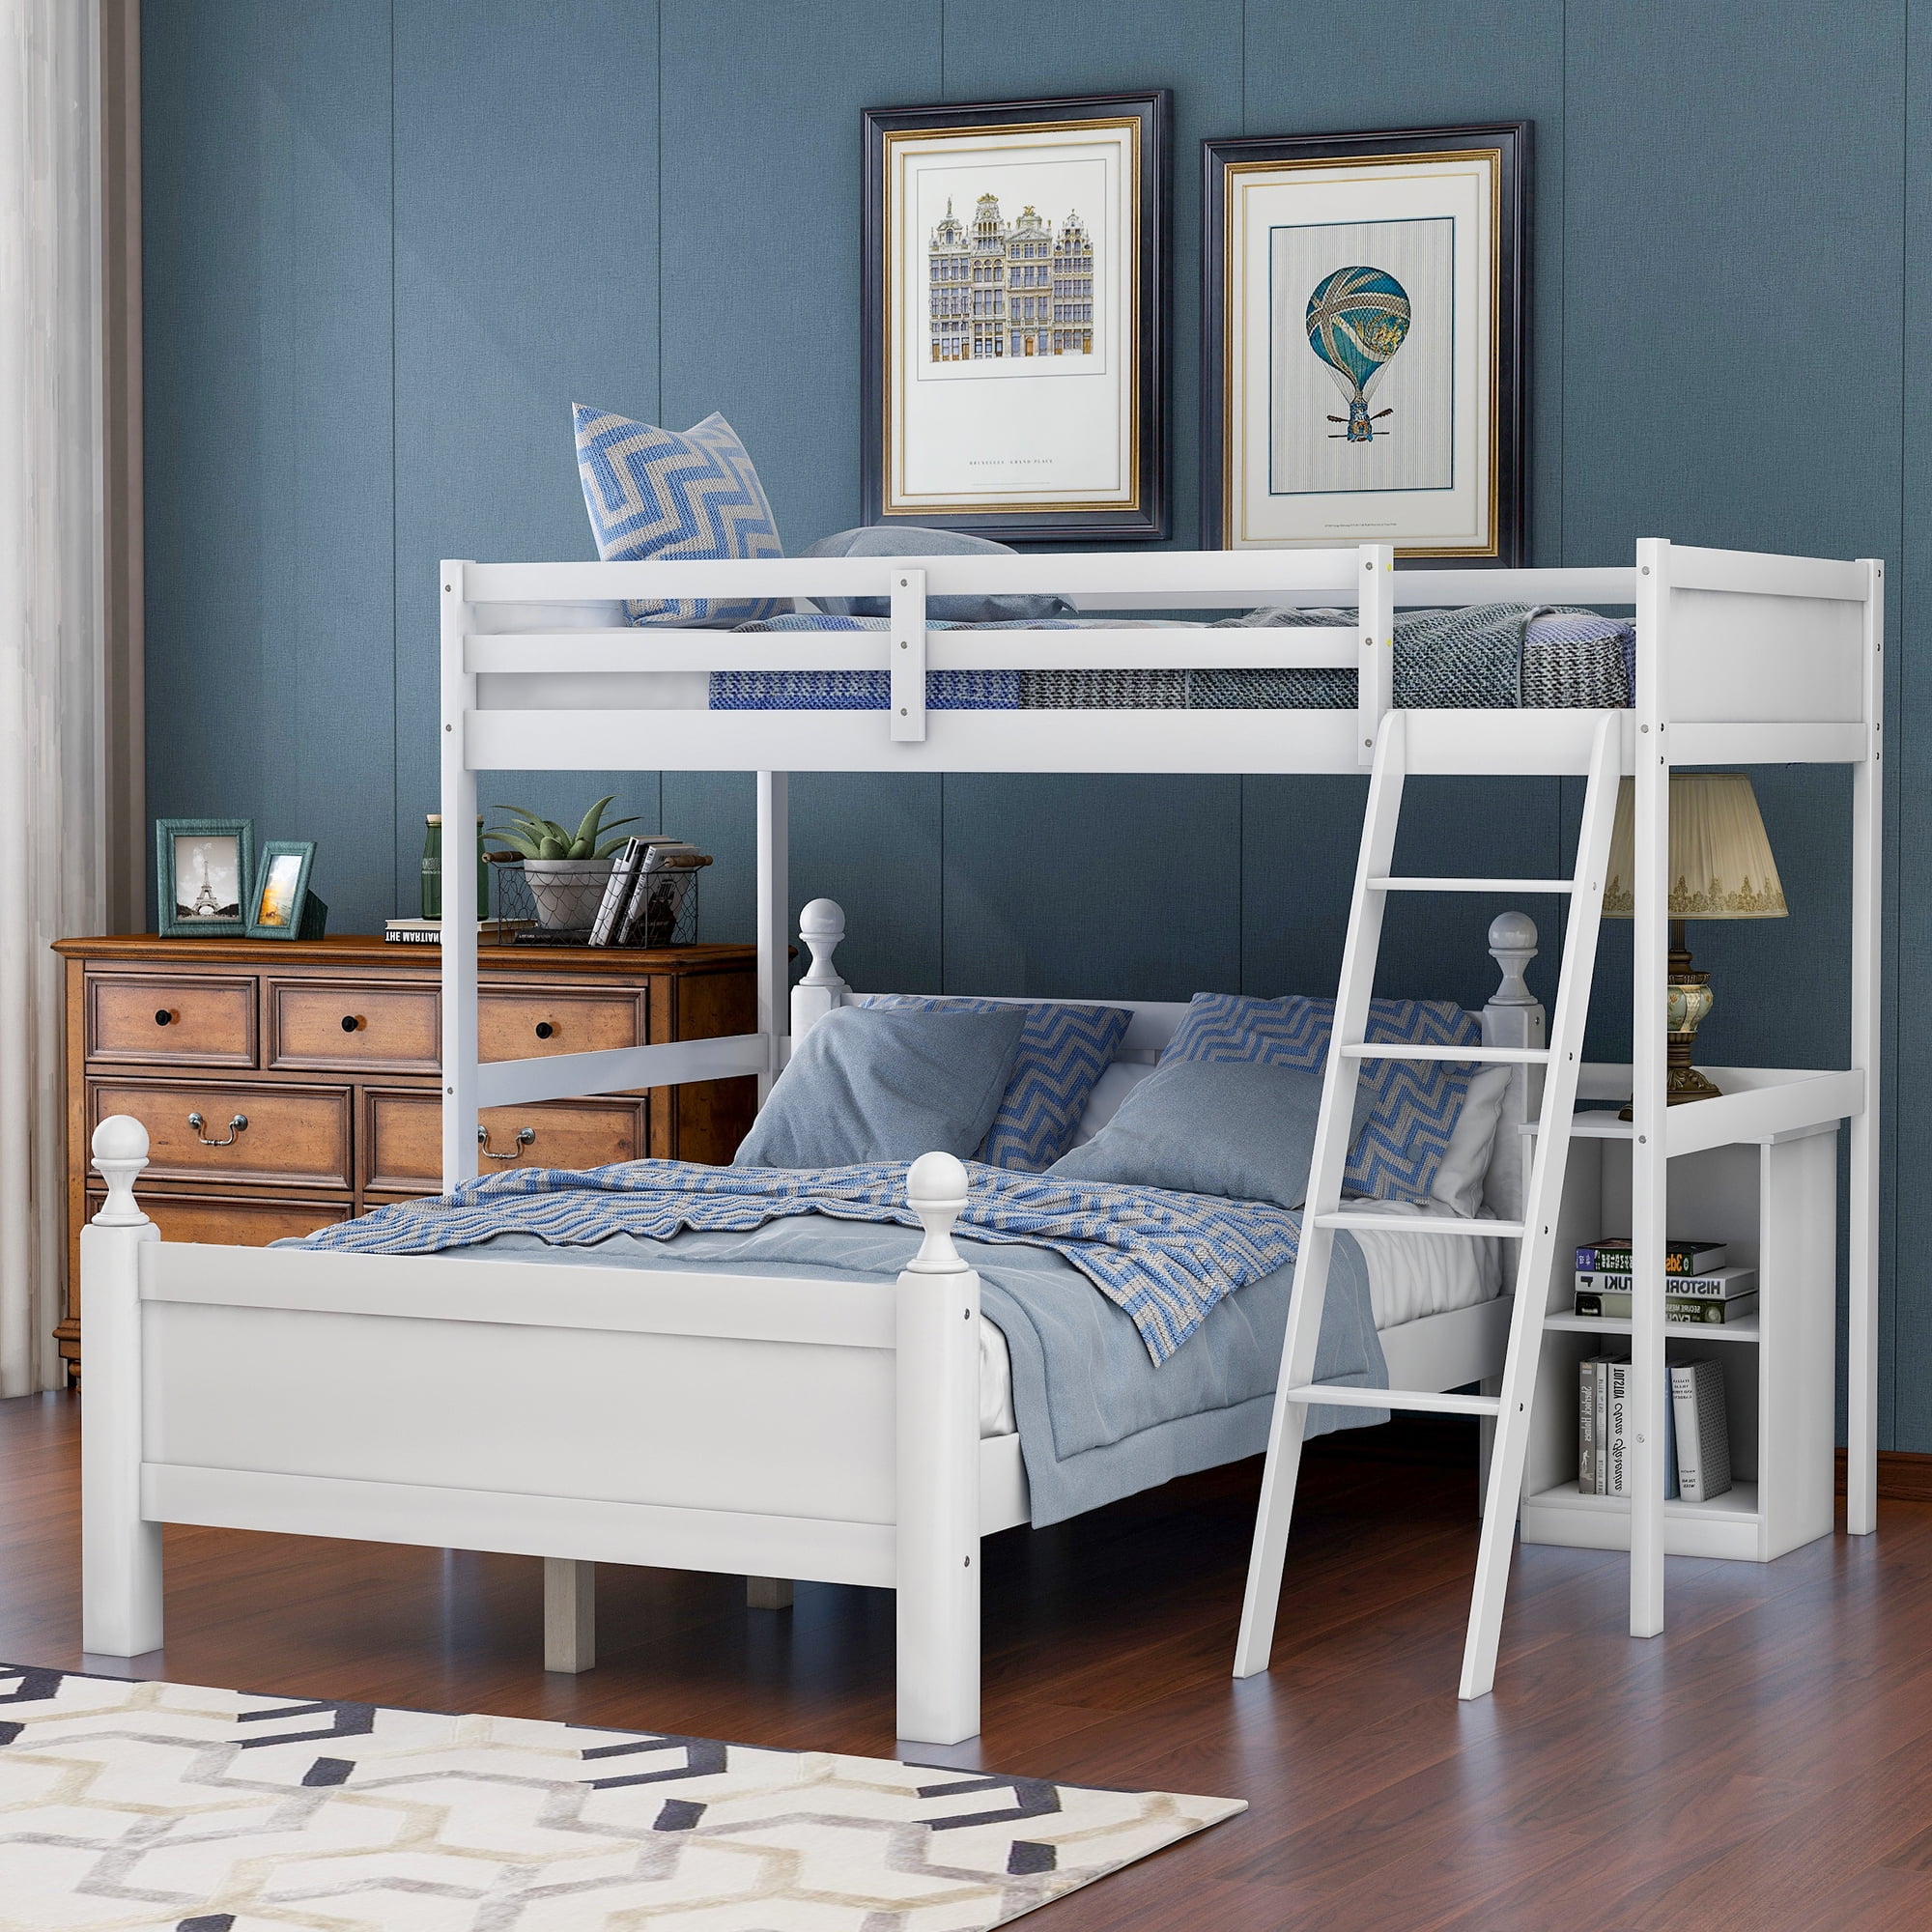 Euroco Wood Bunk Bed, Twin Over Full Loft Bed with Storage White